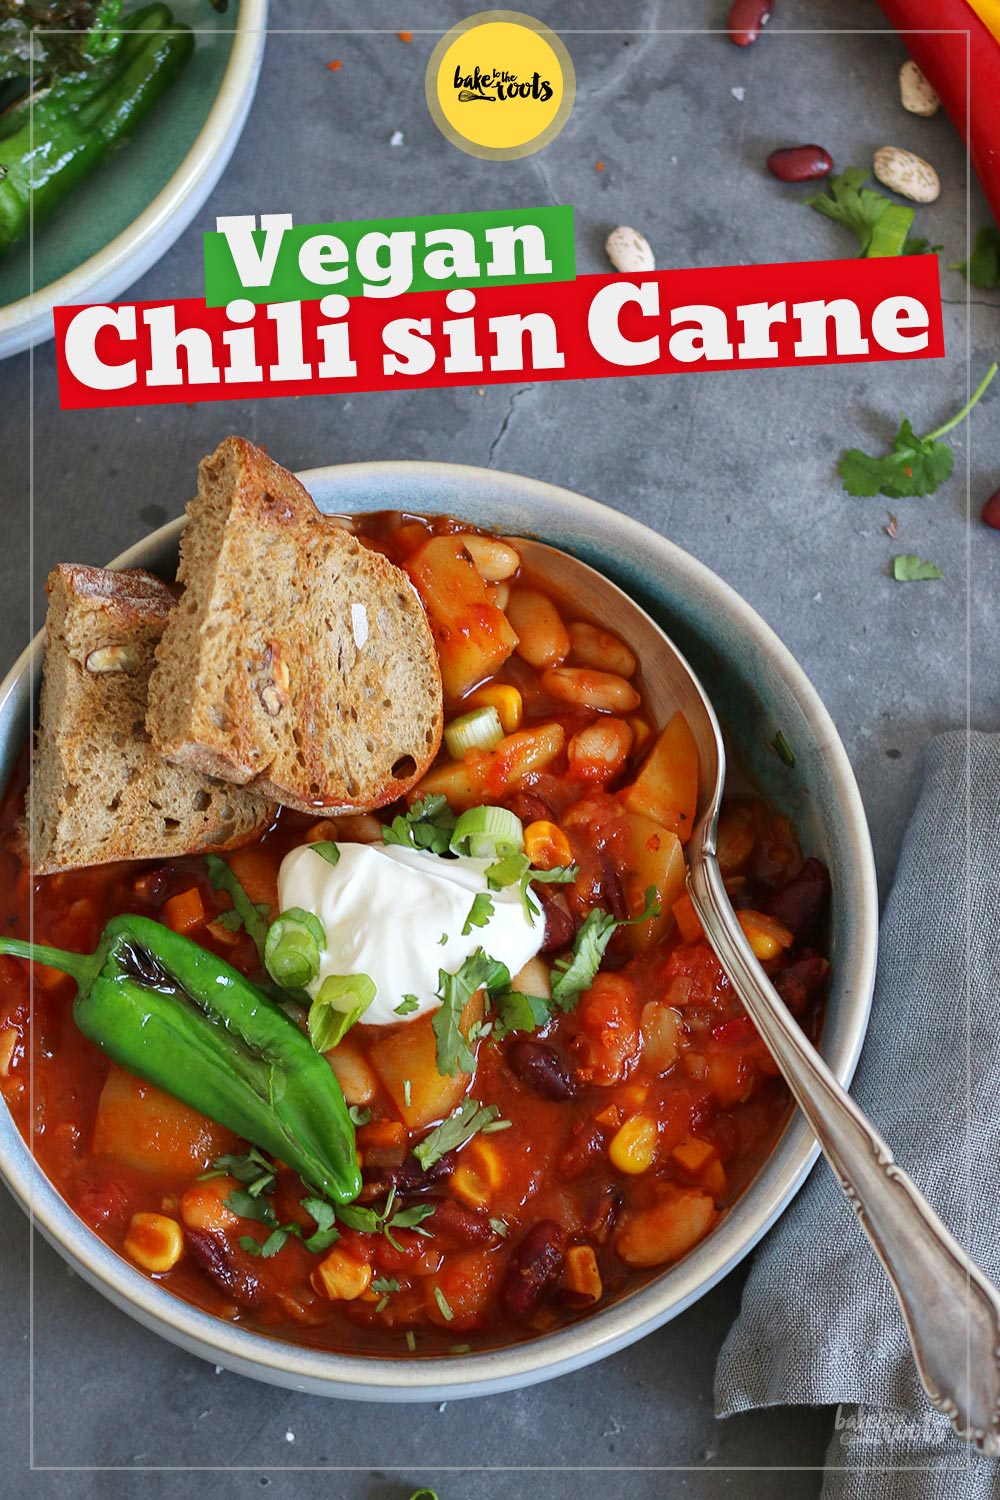 Vegan Chili Sin Carne | Bake to the roots